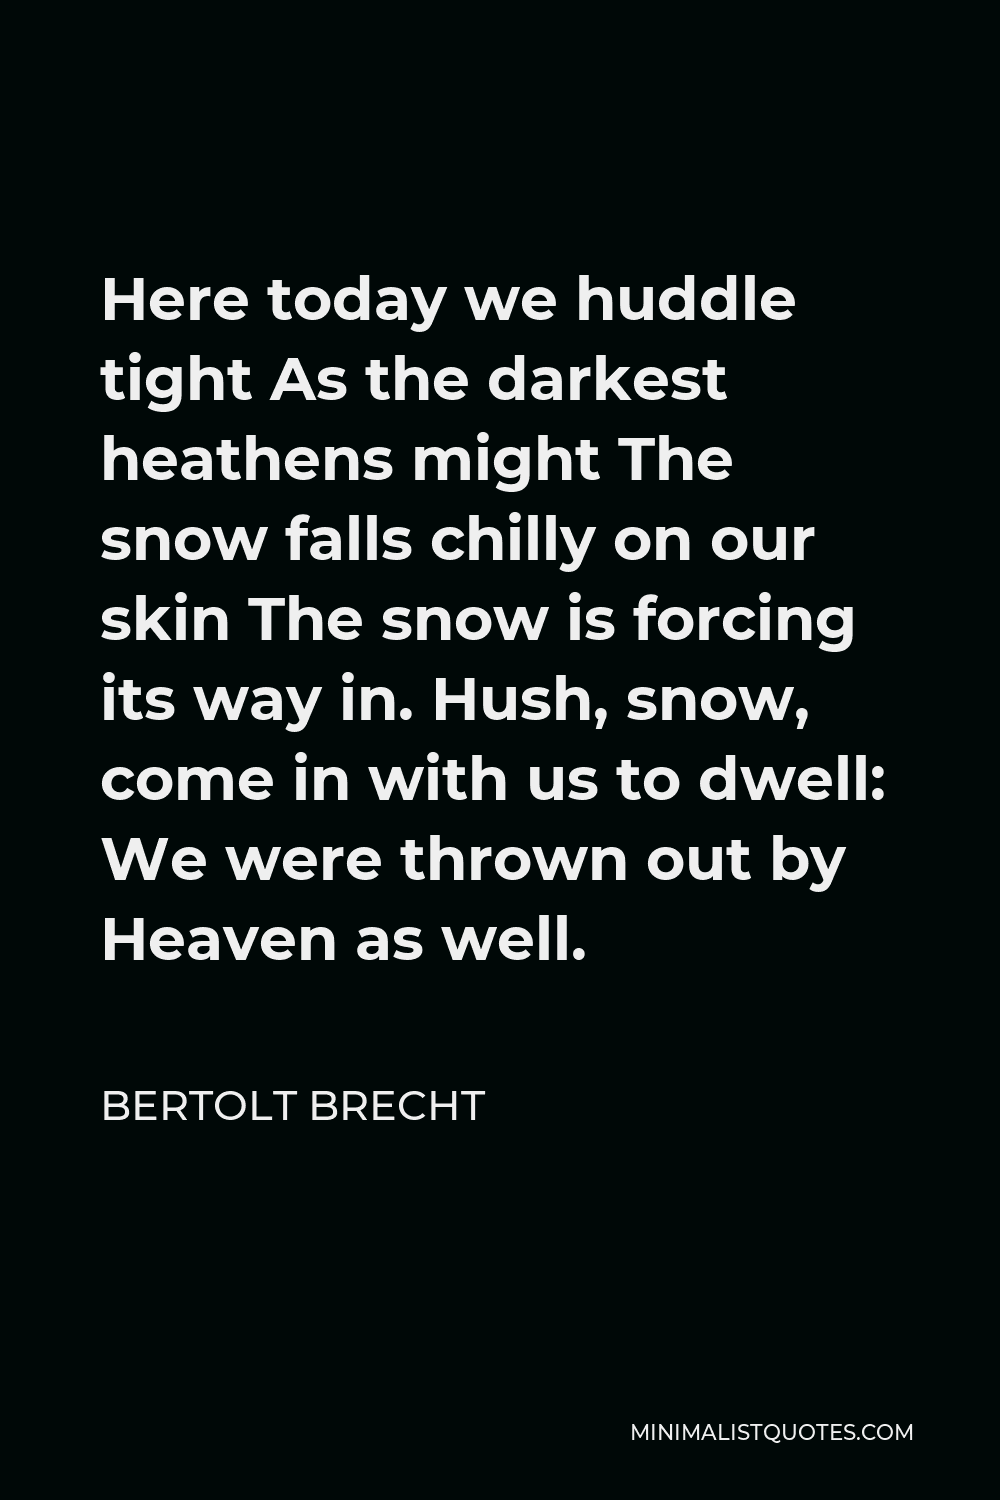 Bertolt Brecht Quote - Here today we huddle tight As the darkest heathens might The snow falls chilly on our skin The snow is forcing its way in. Hush, snow, come in with us to dwell: We were thrown out by Heaven as well.